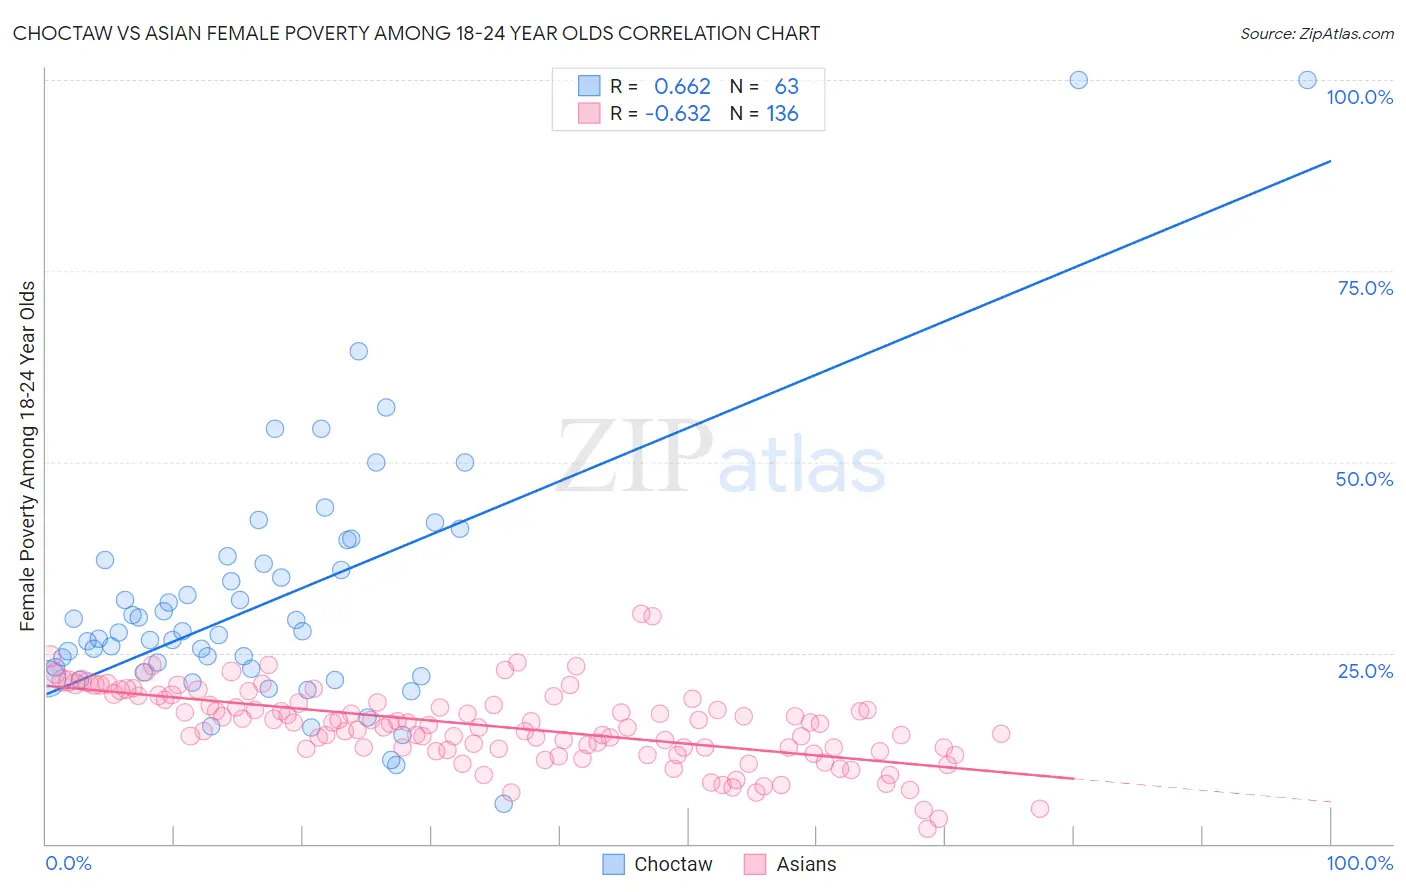 Choctaw vs Asian Female Poverty Among 18-24 Year Olds